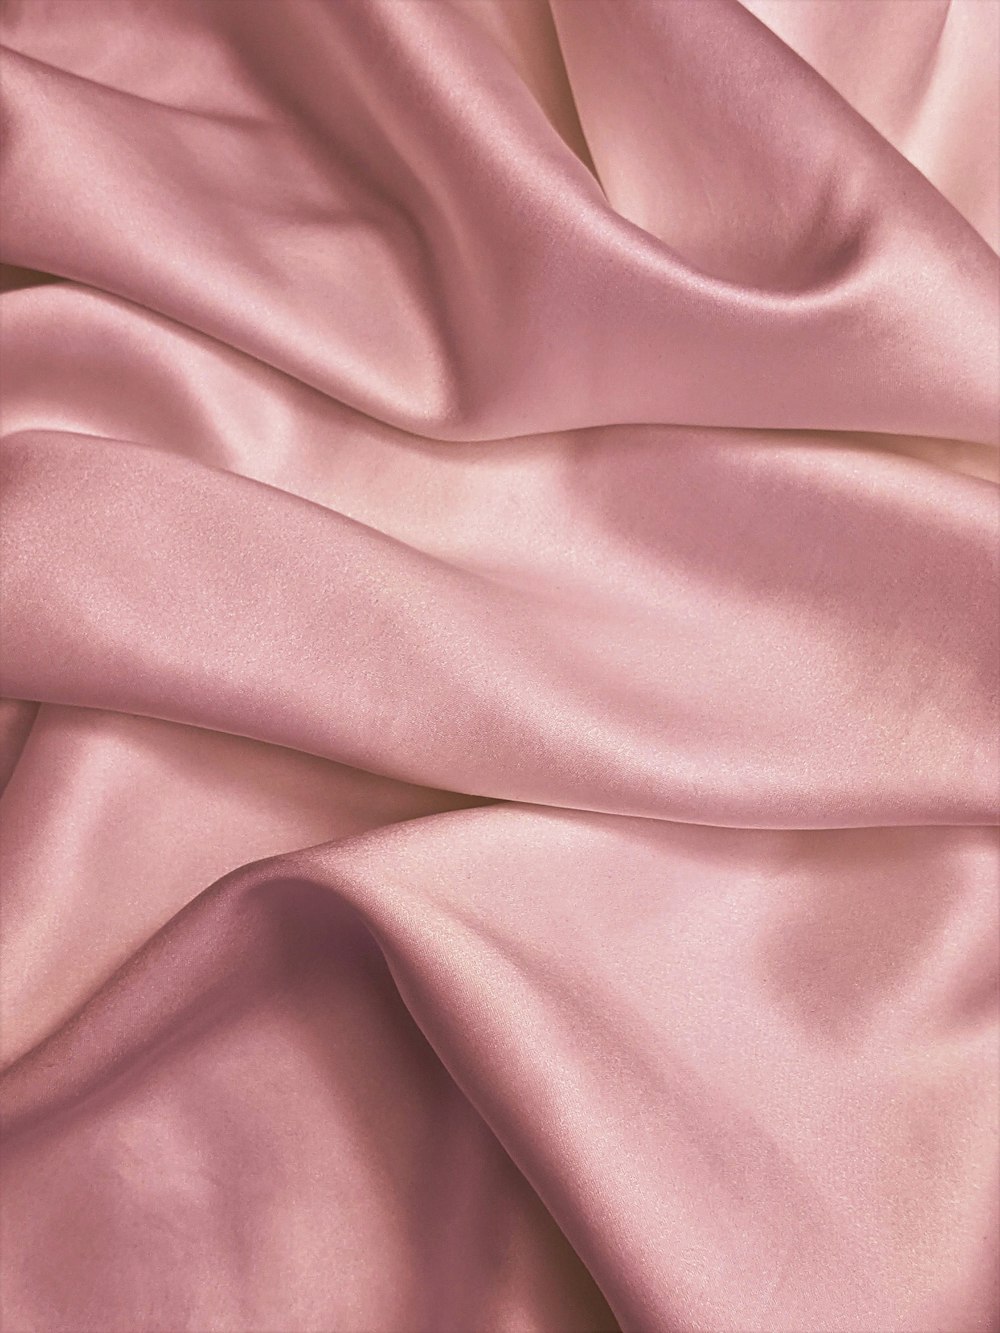 Pink Silk Pictures | Download Free Images on Unsplash